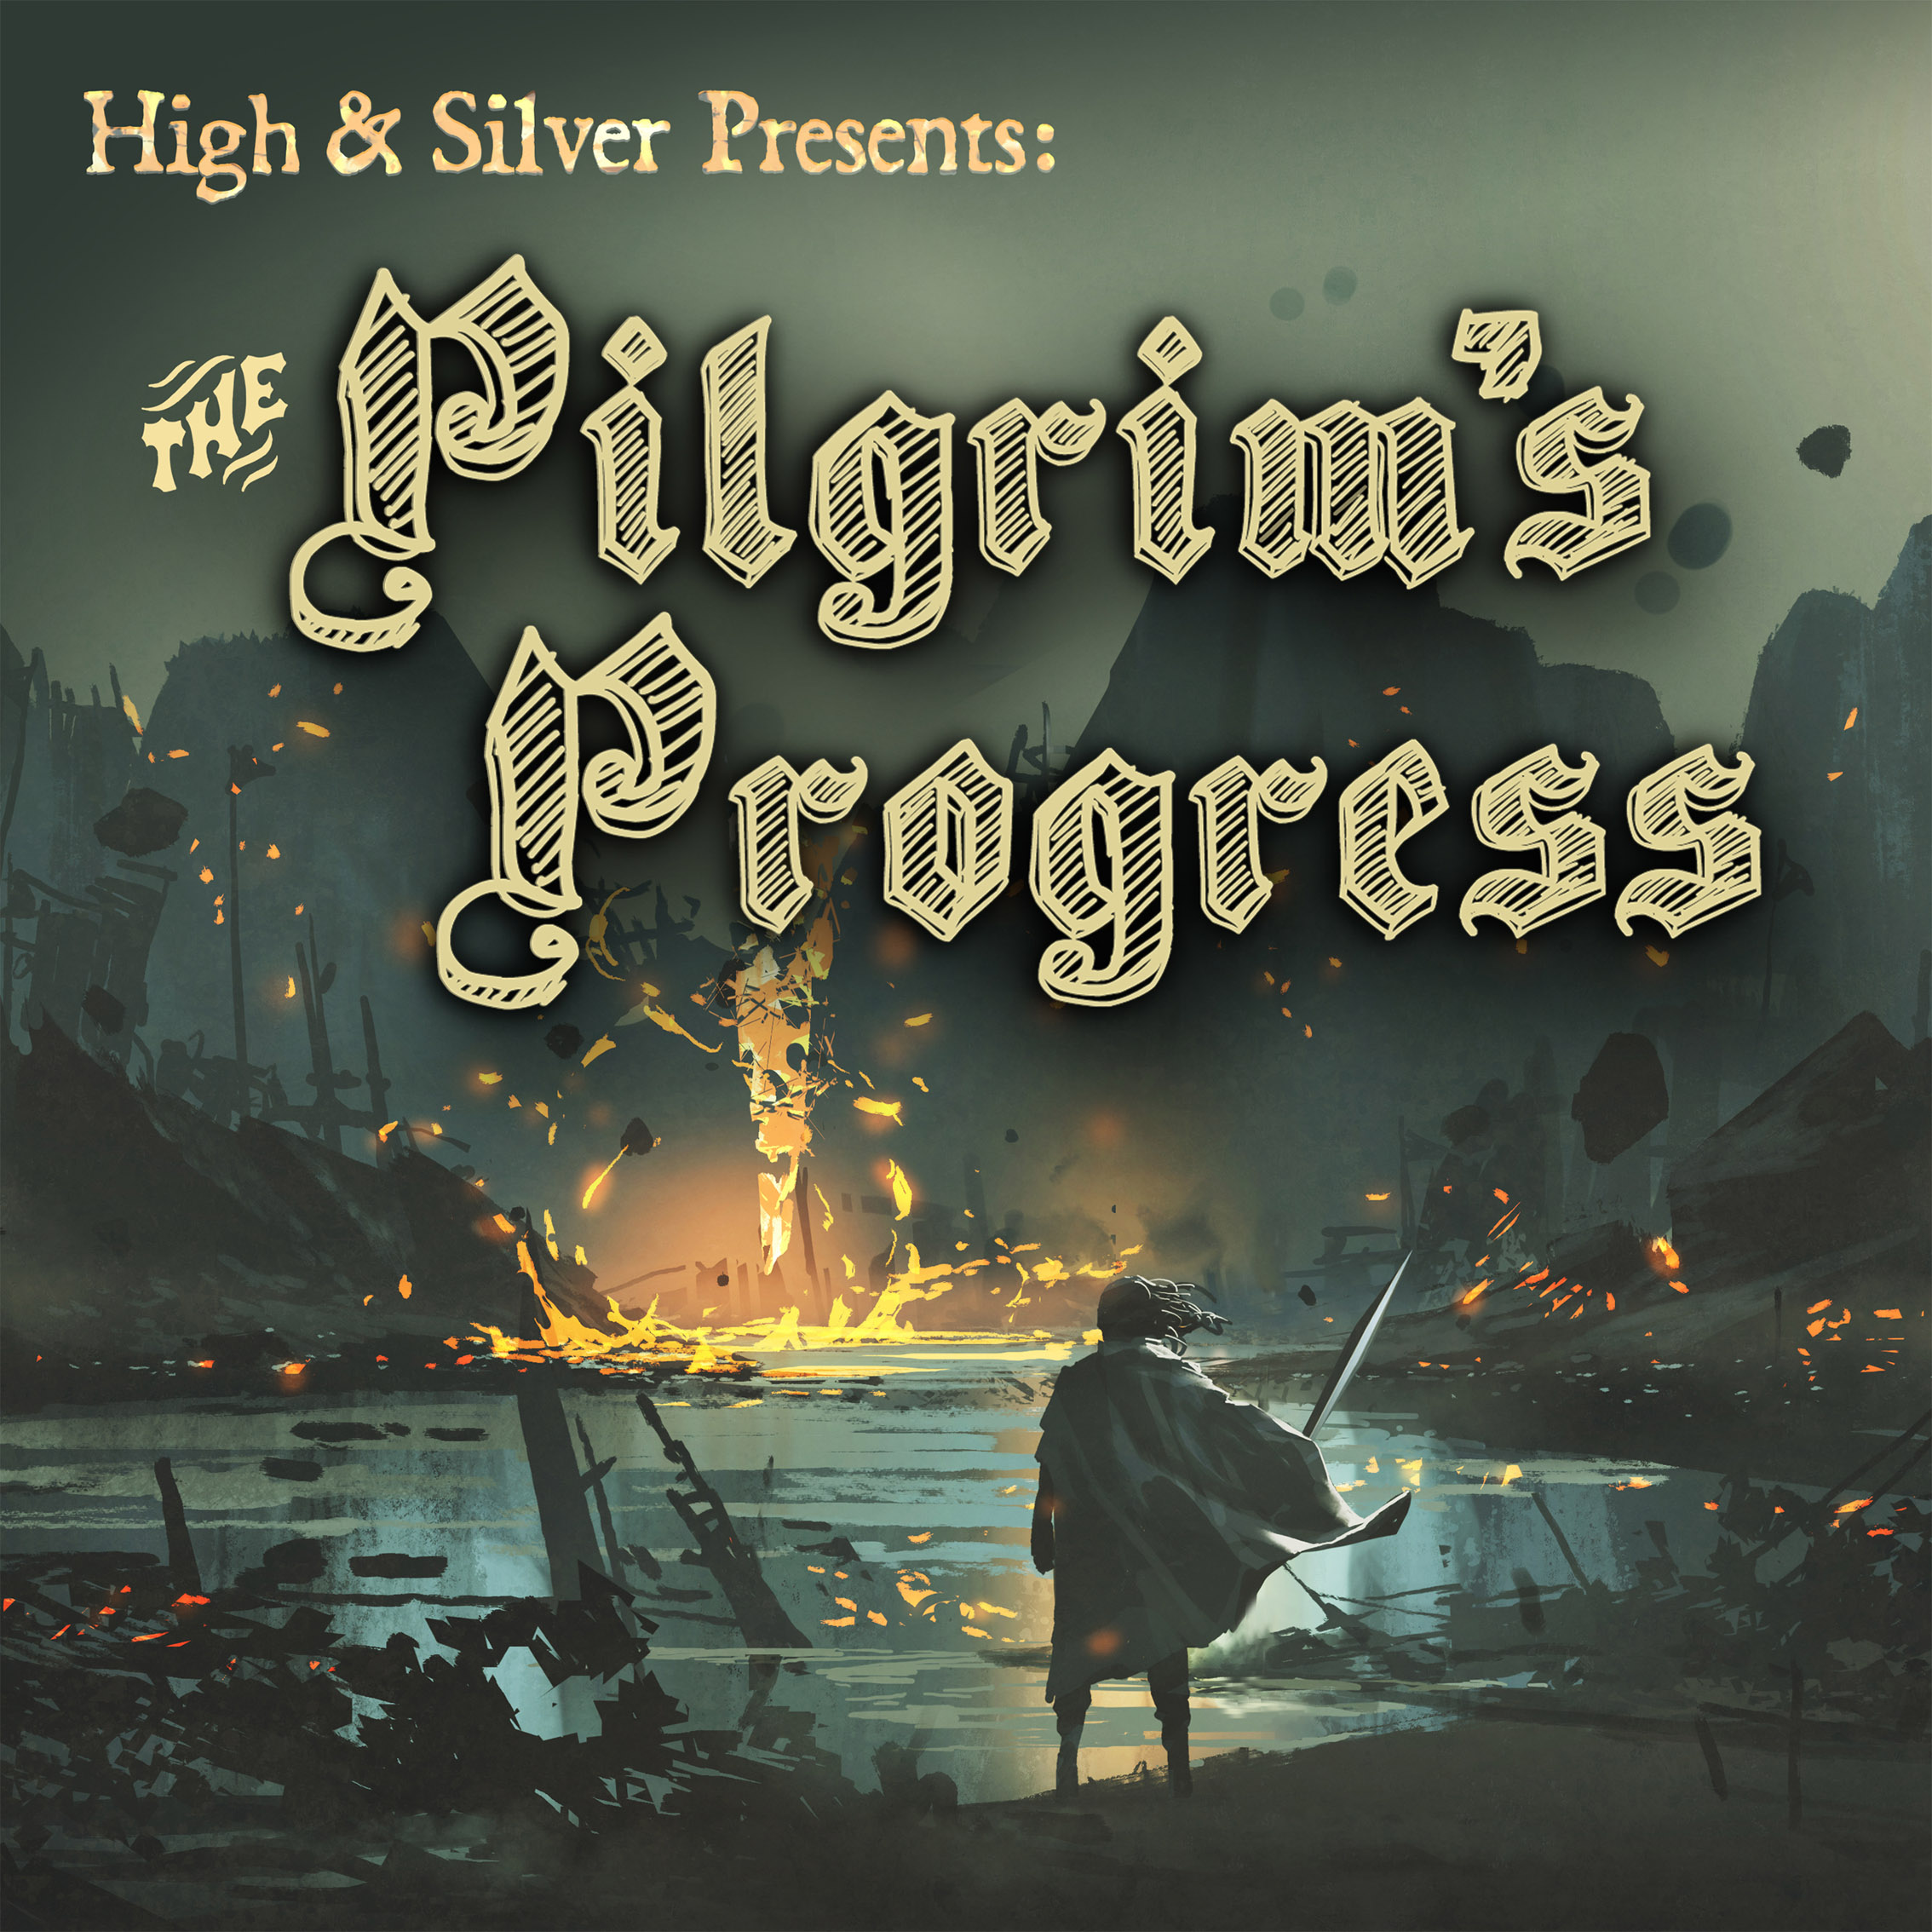 High and Silver Presents: The Pilgrim's Progress